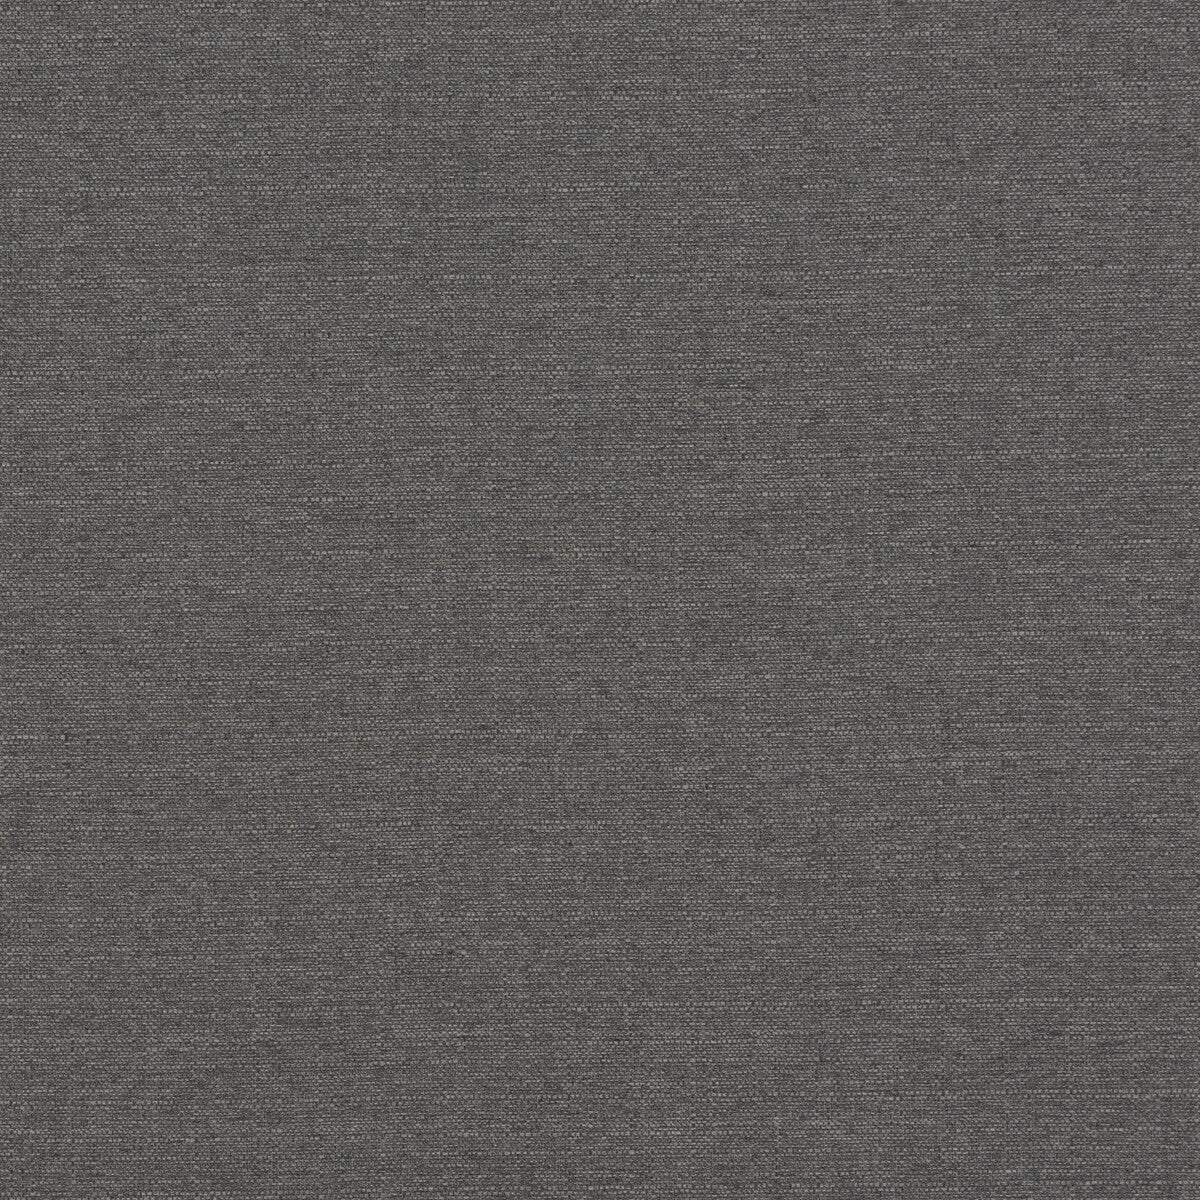 Lansdowne fabric in graphite color - pattern PF50413.970.0 - by Baker Lifestyle in the Notebooks collection